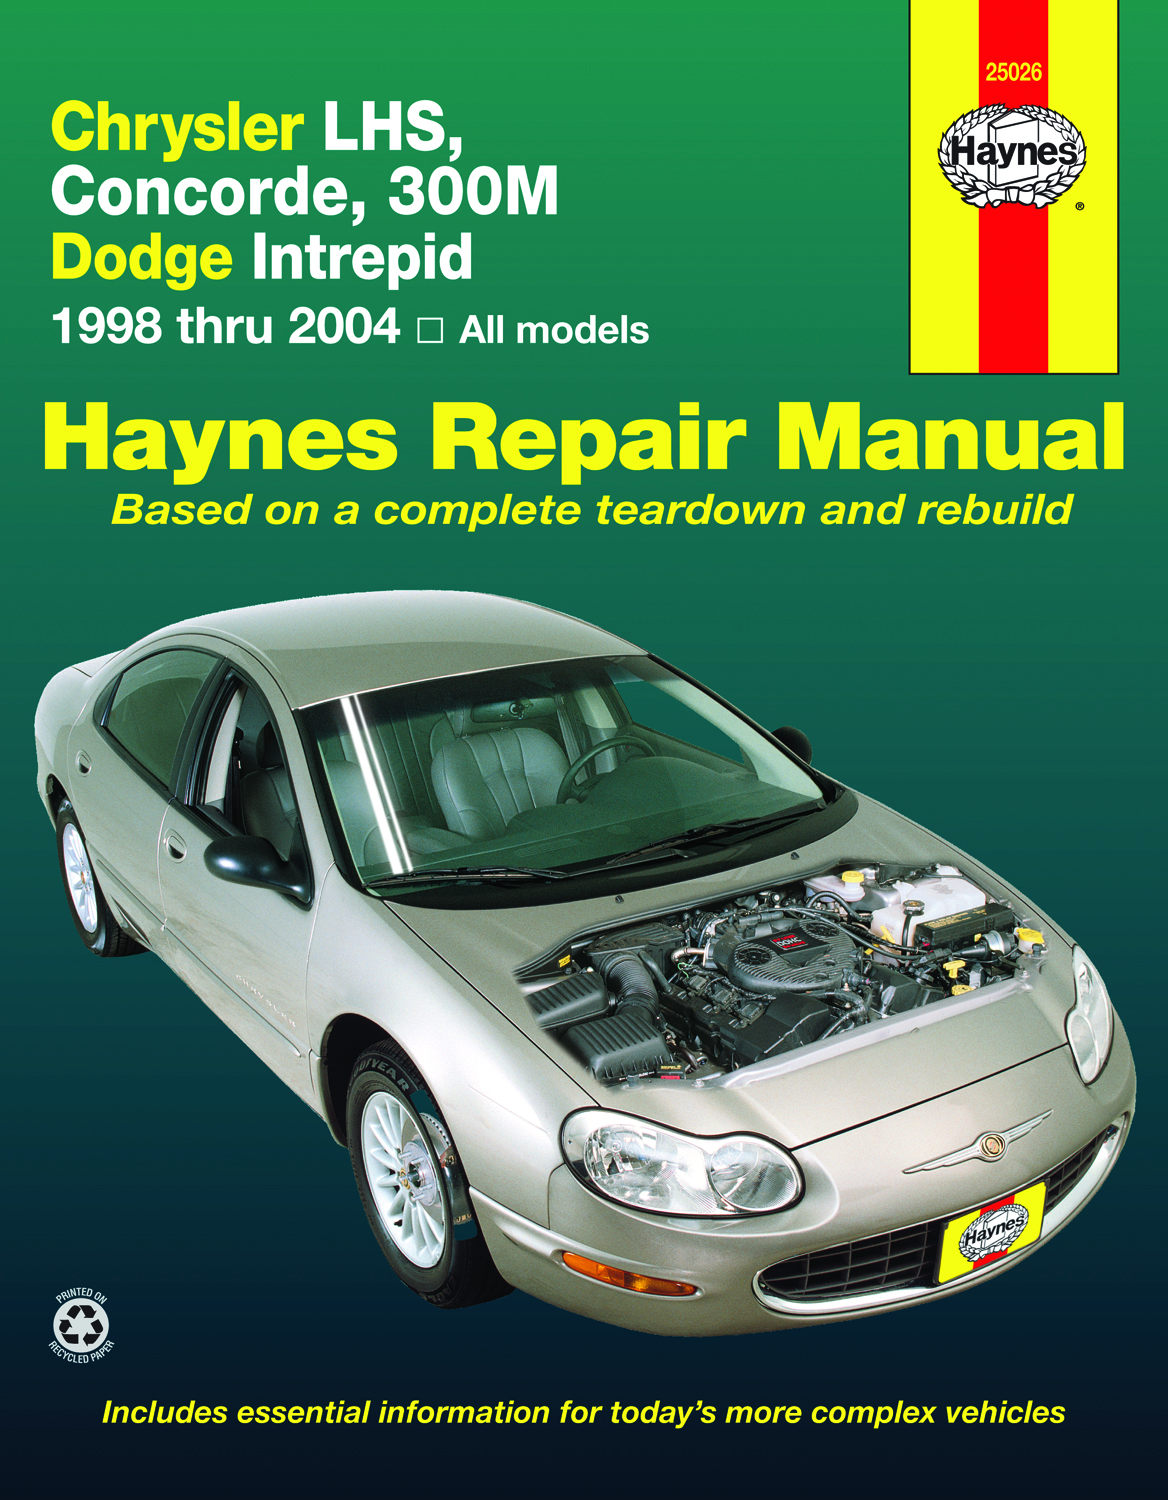 04 2004 Dodge Intrepid owners manual